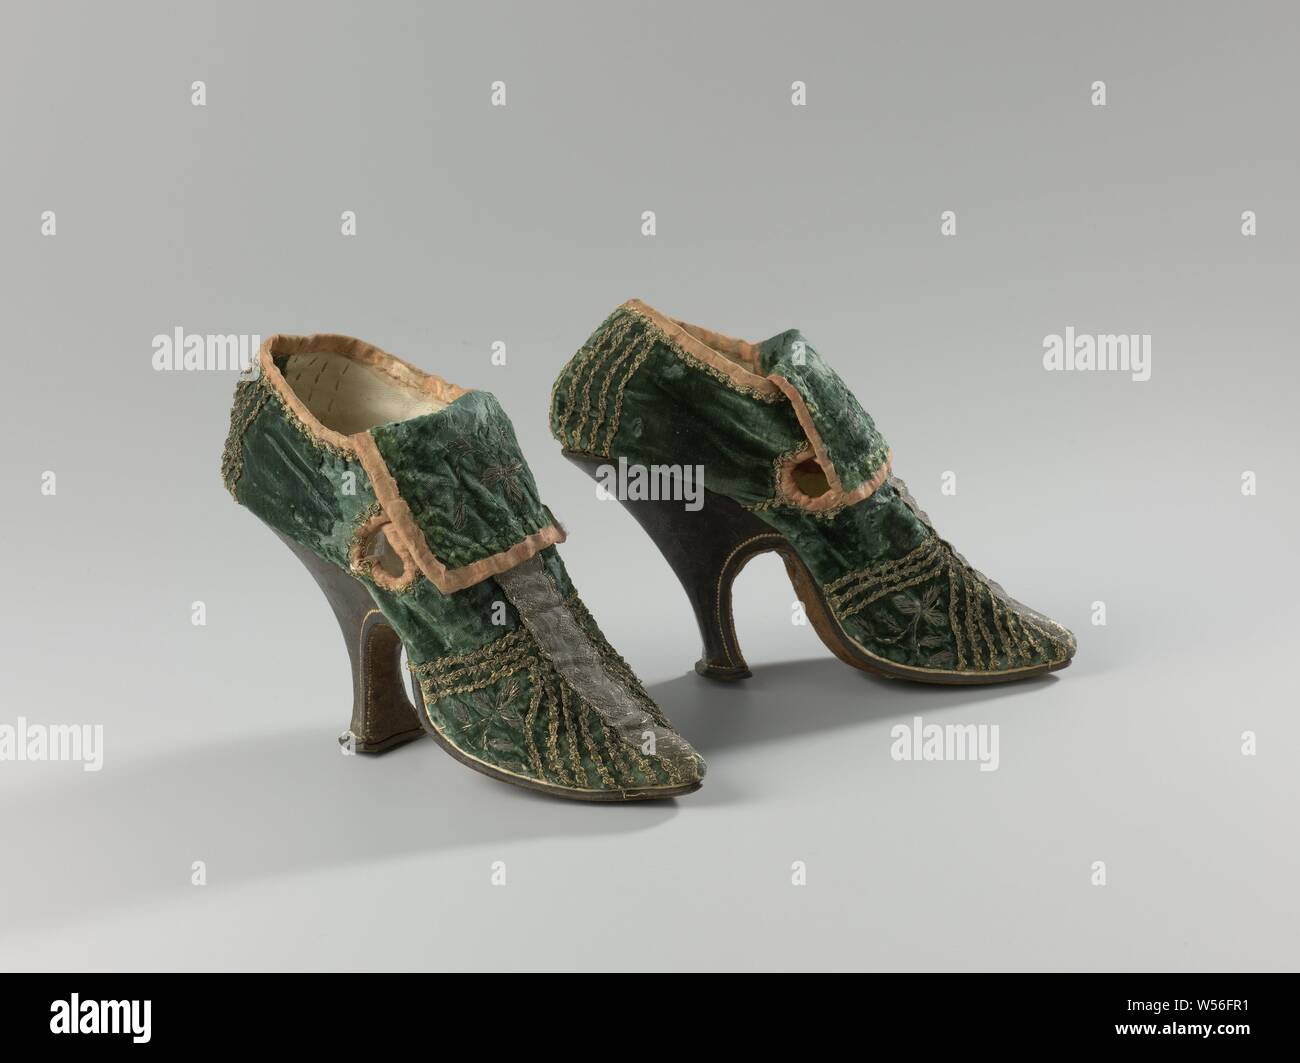 Pair of High-Heeled Women's Shoes Pair of women's high-heeled shoes Green  velvet women's shoe decorated with vertical and diagonal silver trims, with  thin high leather heel, Green velvet women's shoe decorated with